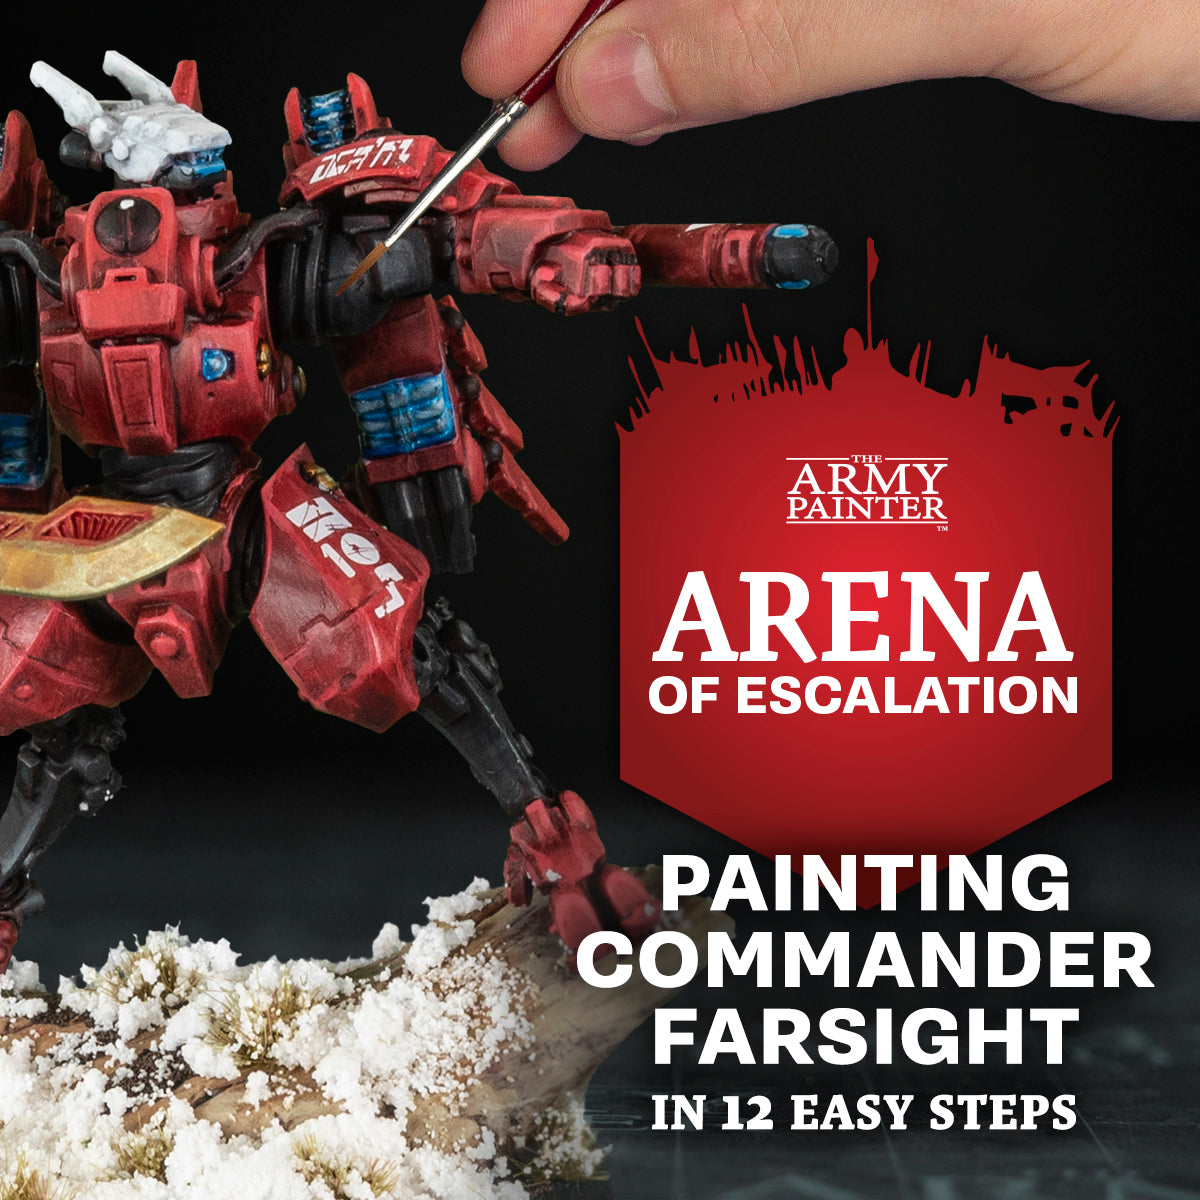 The Arena of Escalation: Painting Commander Farsight in 12  Easy Steps